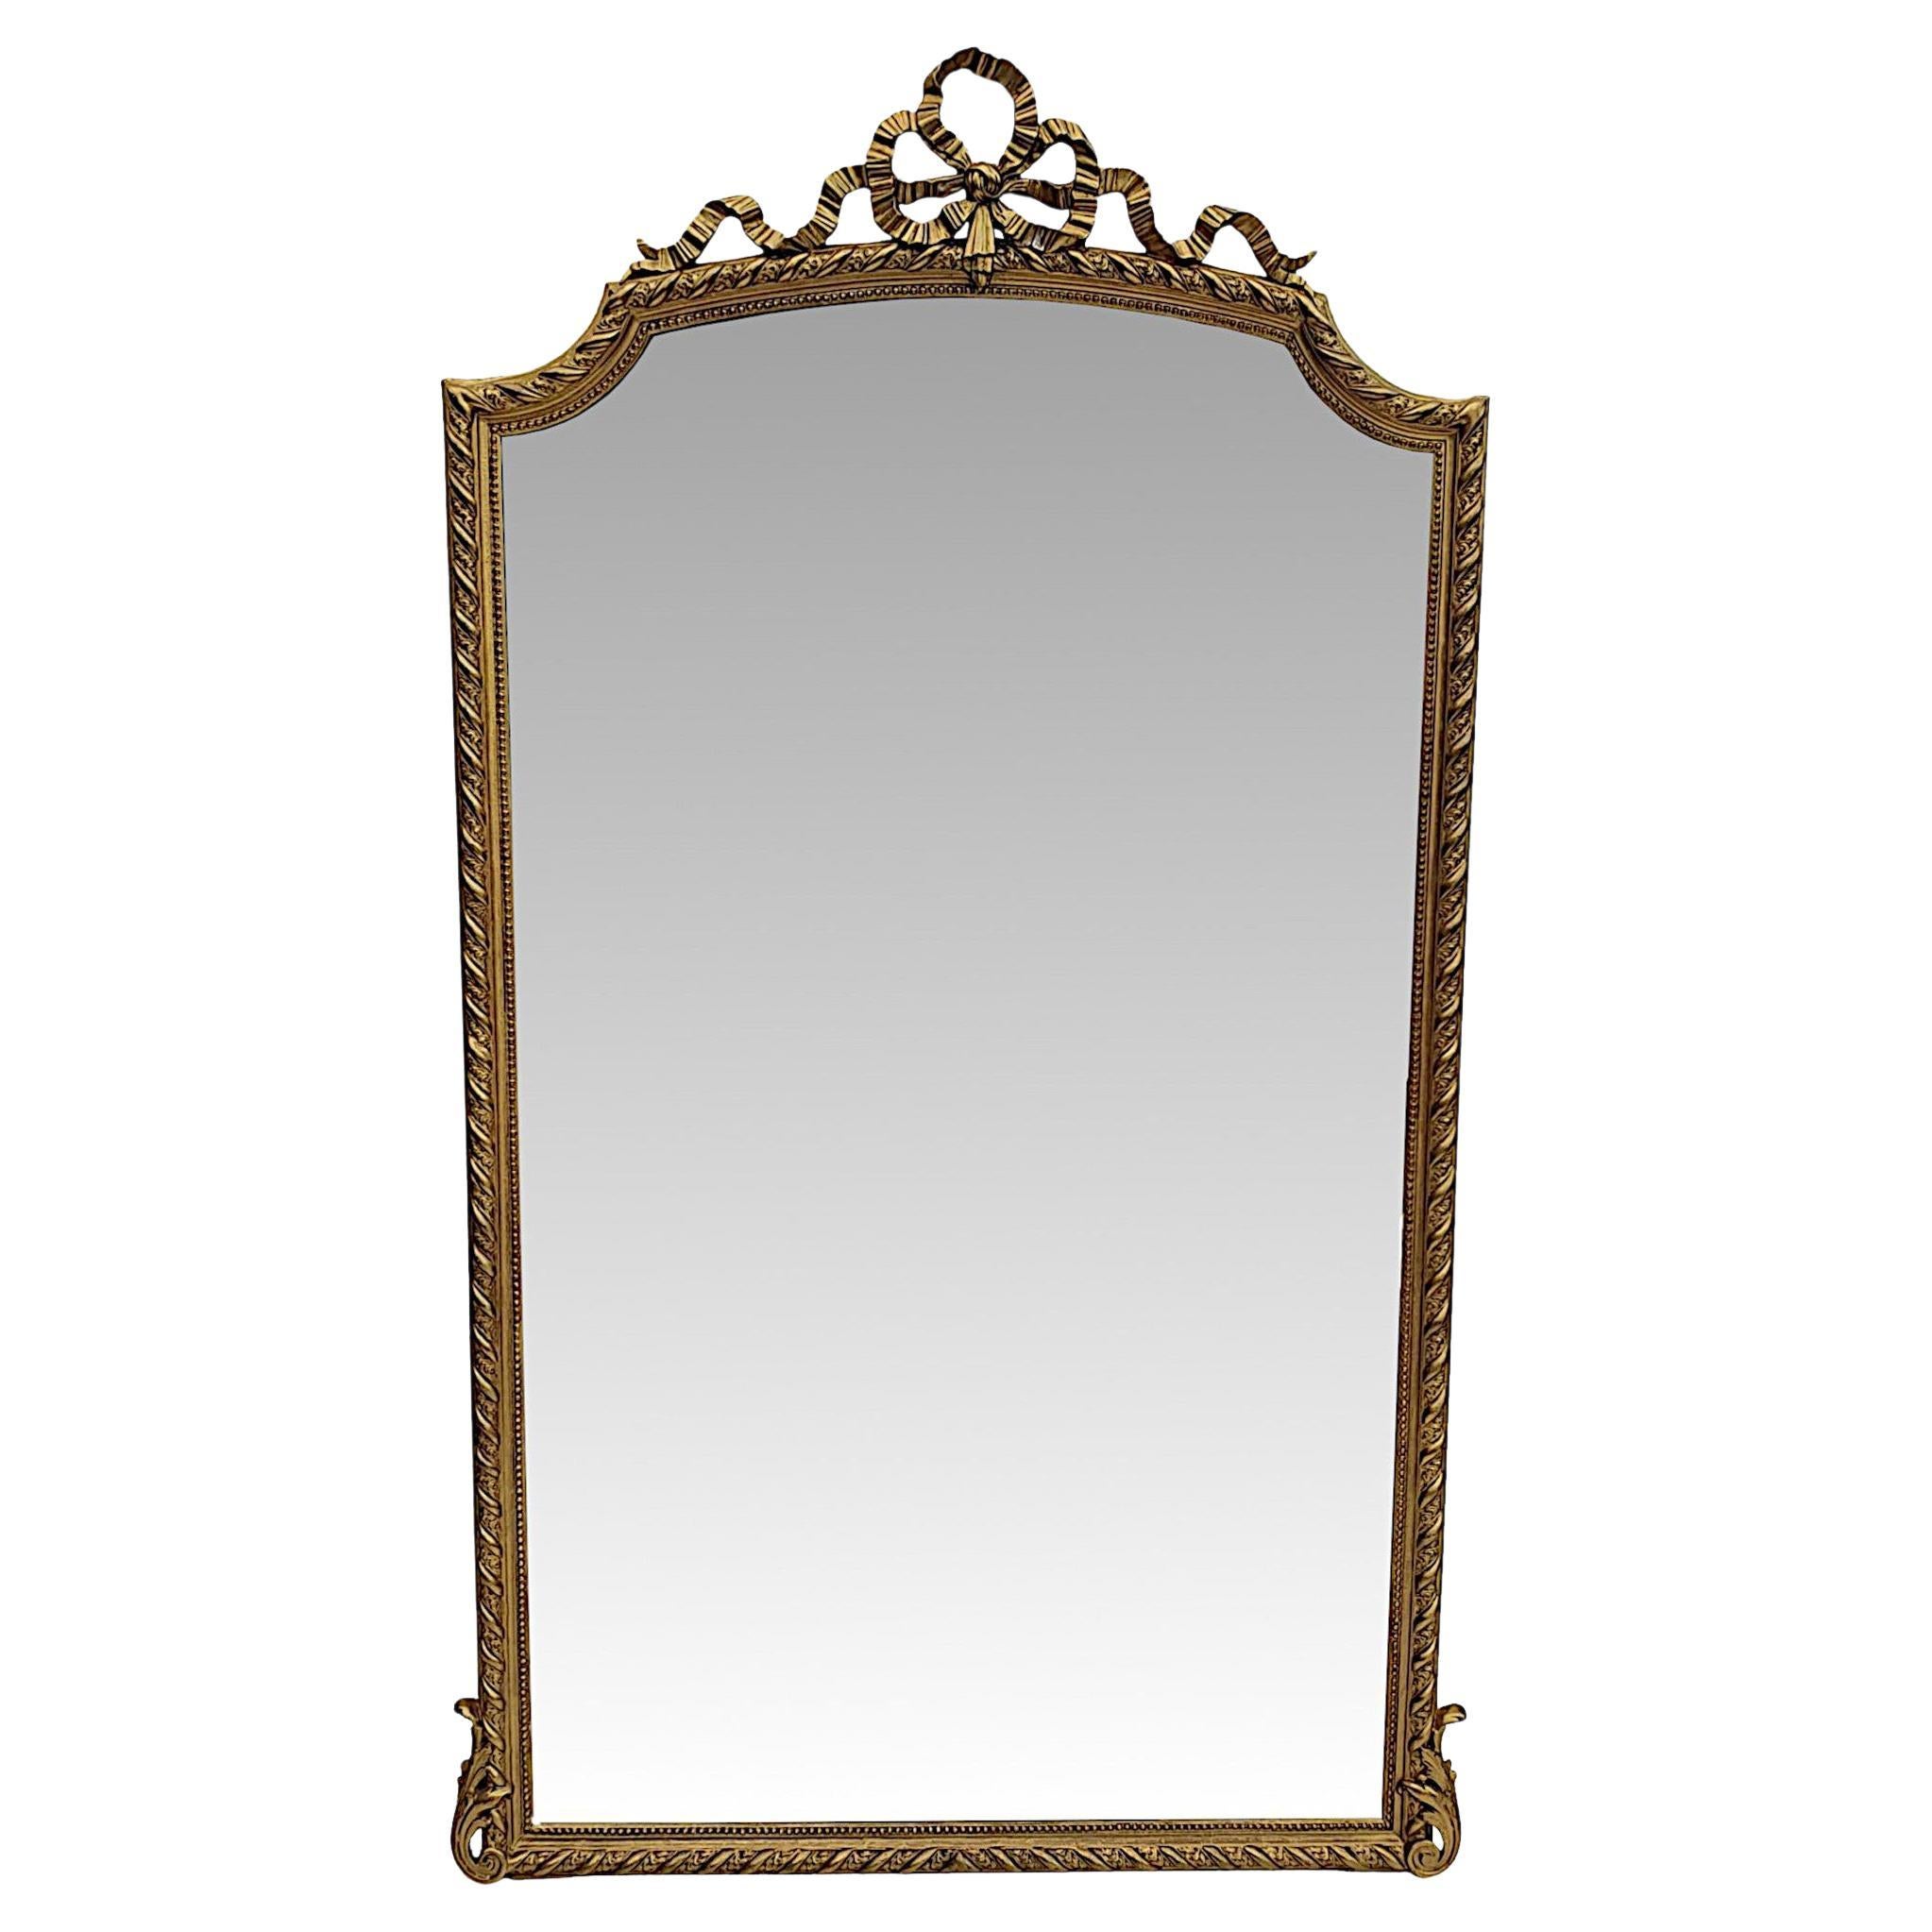 Very Fine 19th Century Giltwood Leaner or Hall or Overmantle Mirror For Sale